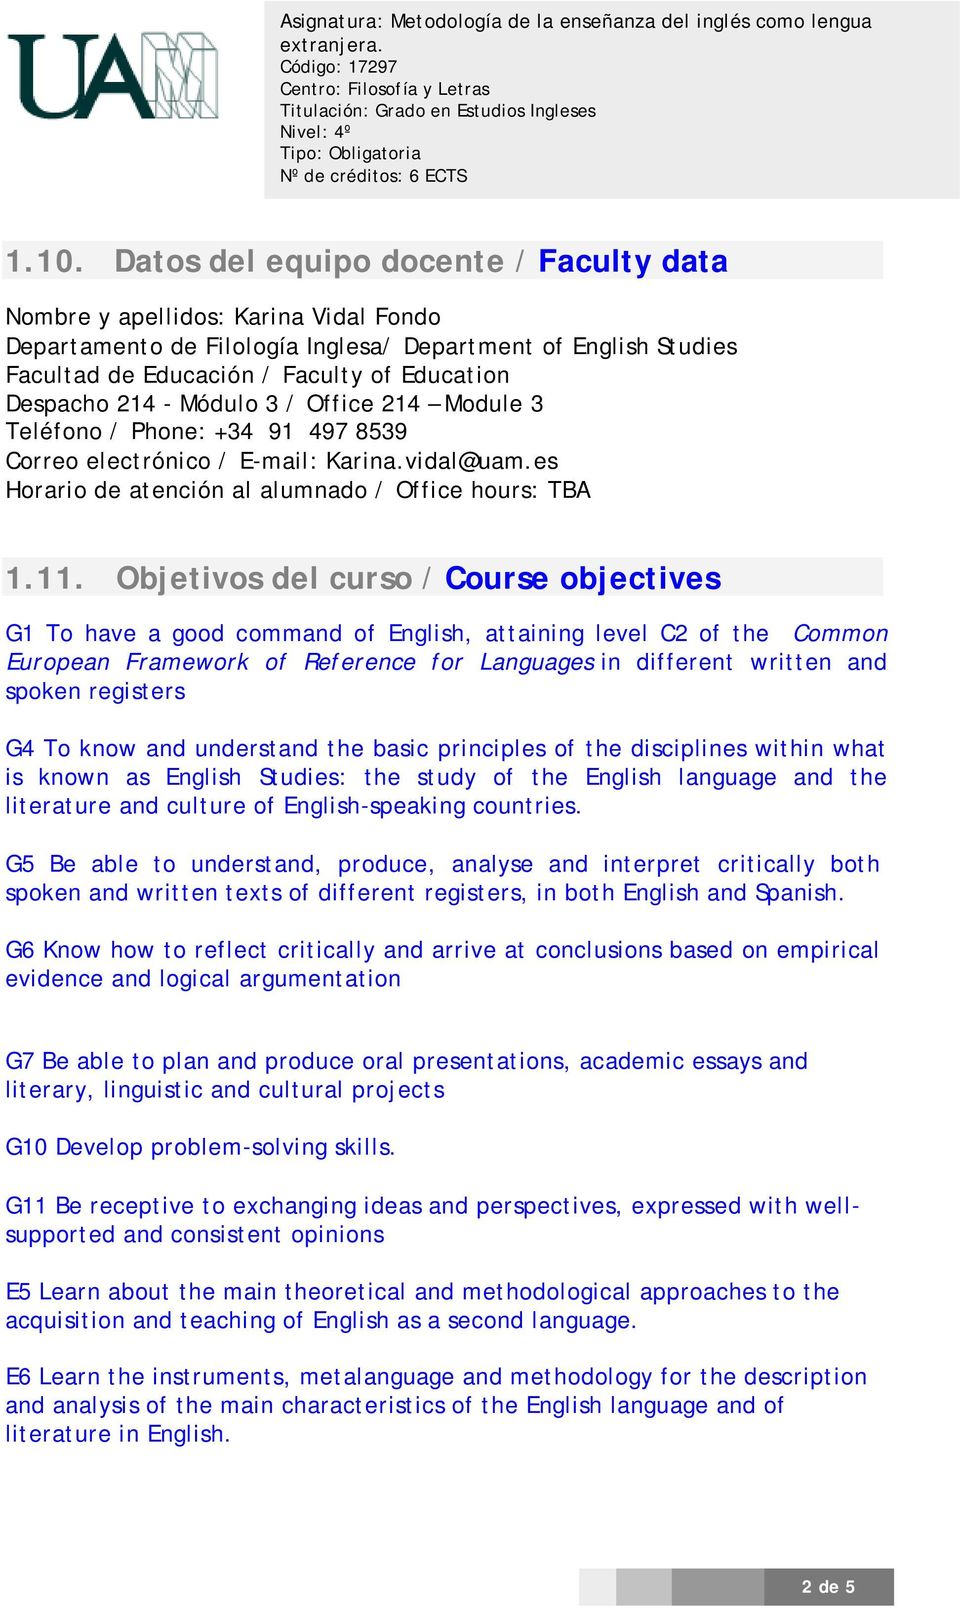 Objetivos del curso / Course objectives G1 To have a good command of English, attaining level C2 of the Common European Framework of Reference for Languages in different written and spoken registers